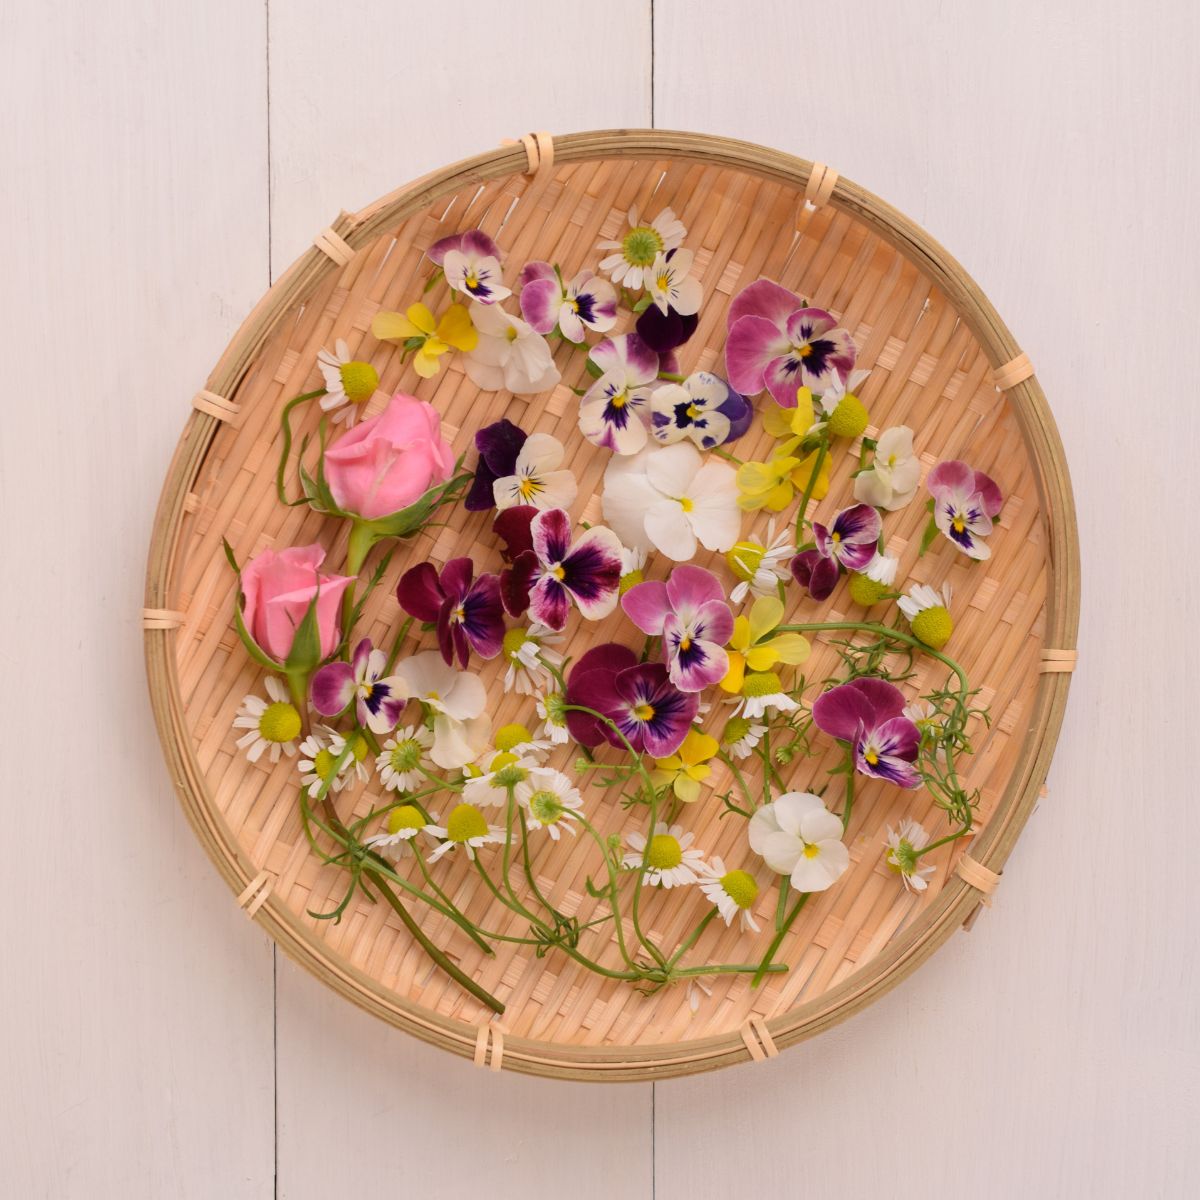 A plate with edible flowers.